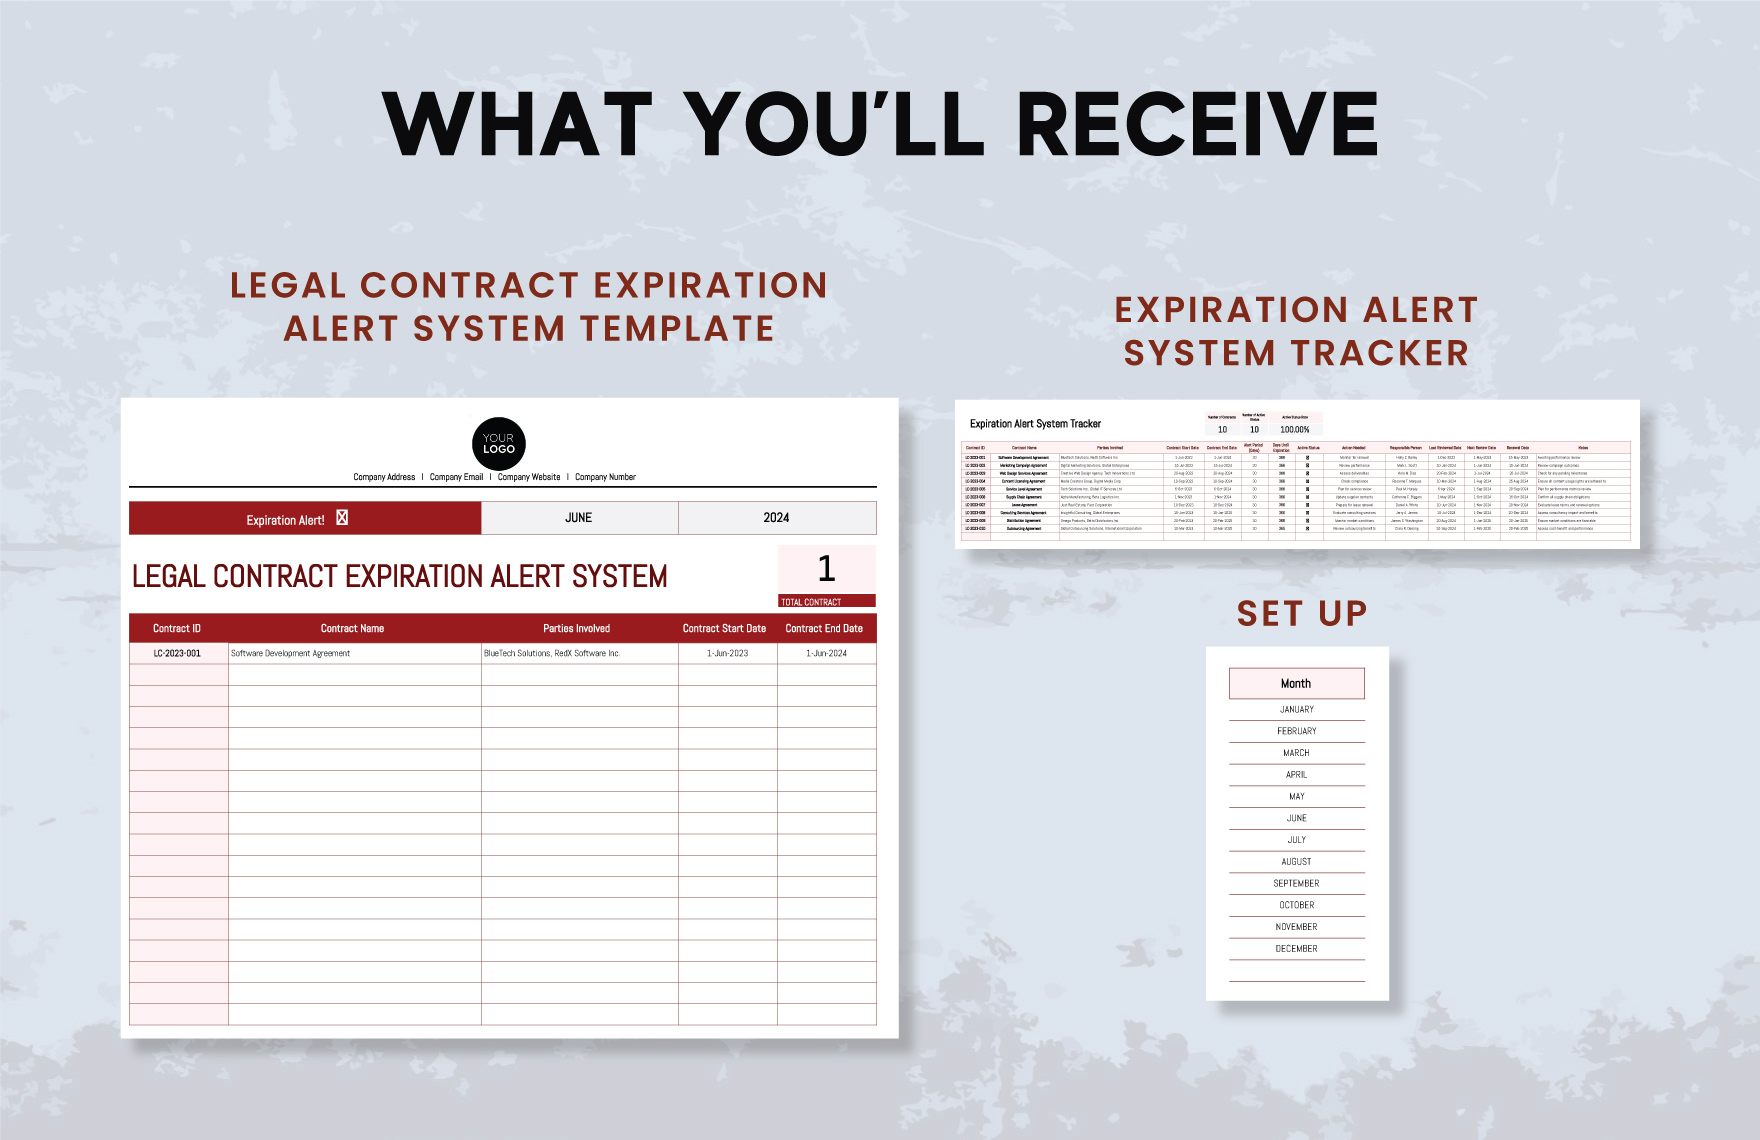 Legal Contract Expiration Alert System Template